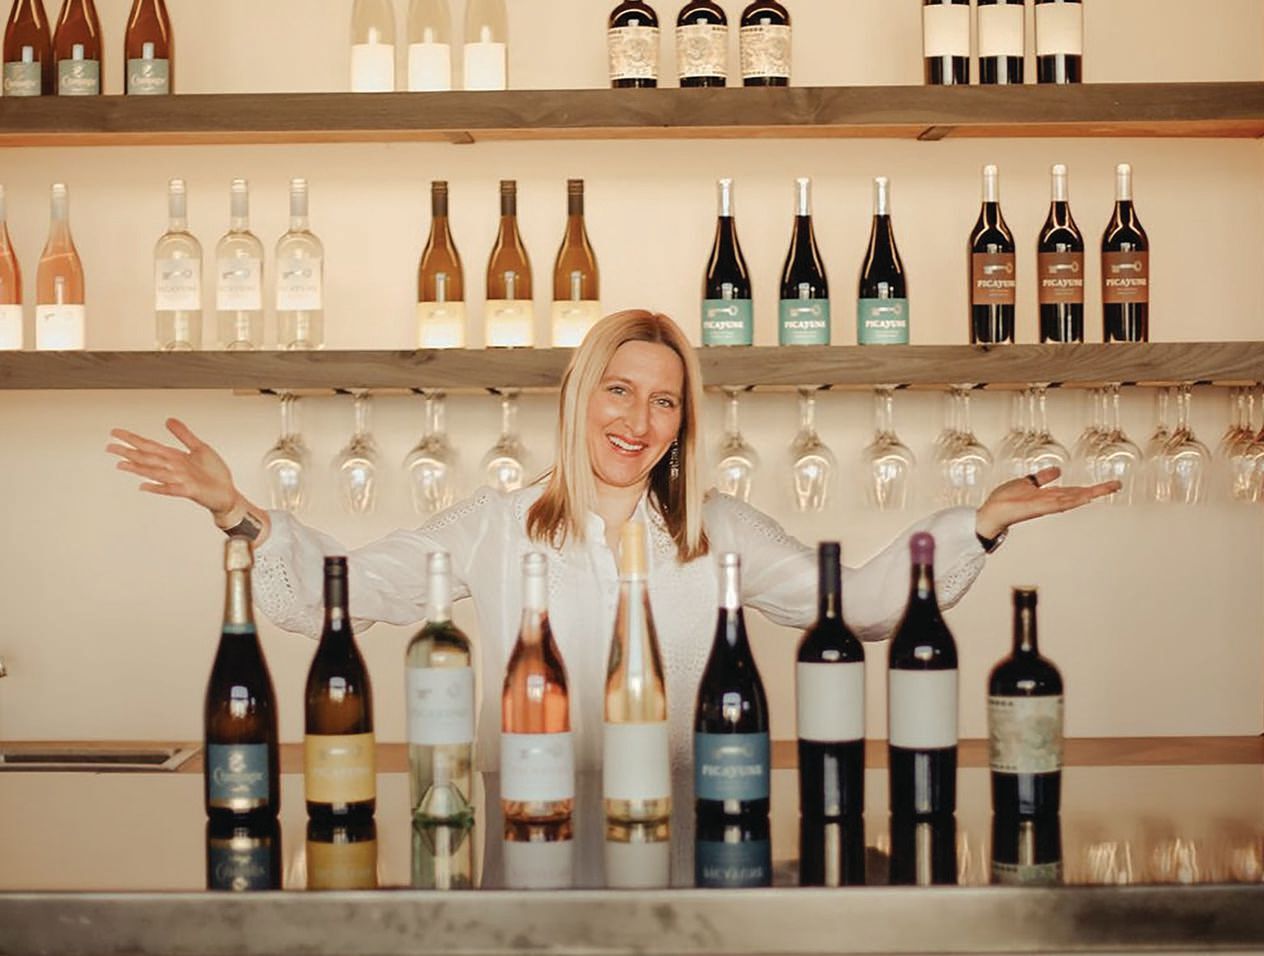 Picayune Cellars has expanded into Calistoga. PHOTO: COURTESY OF BRAND